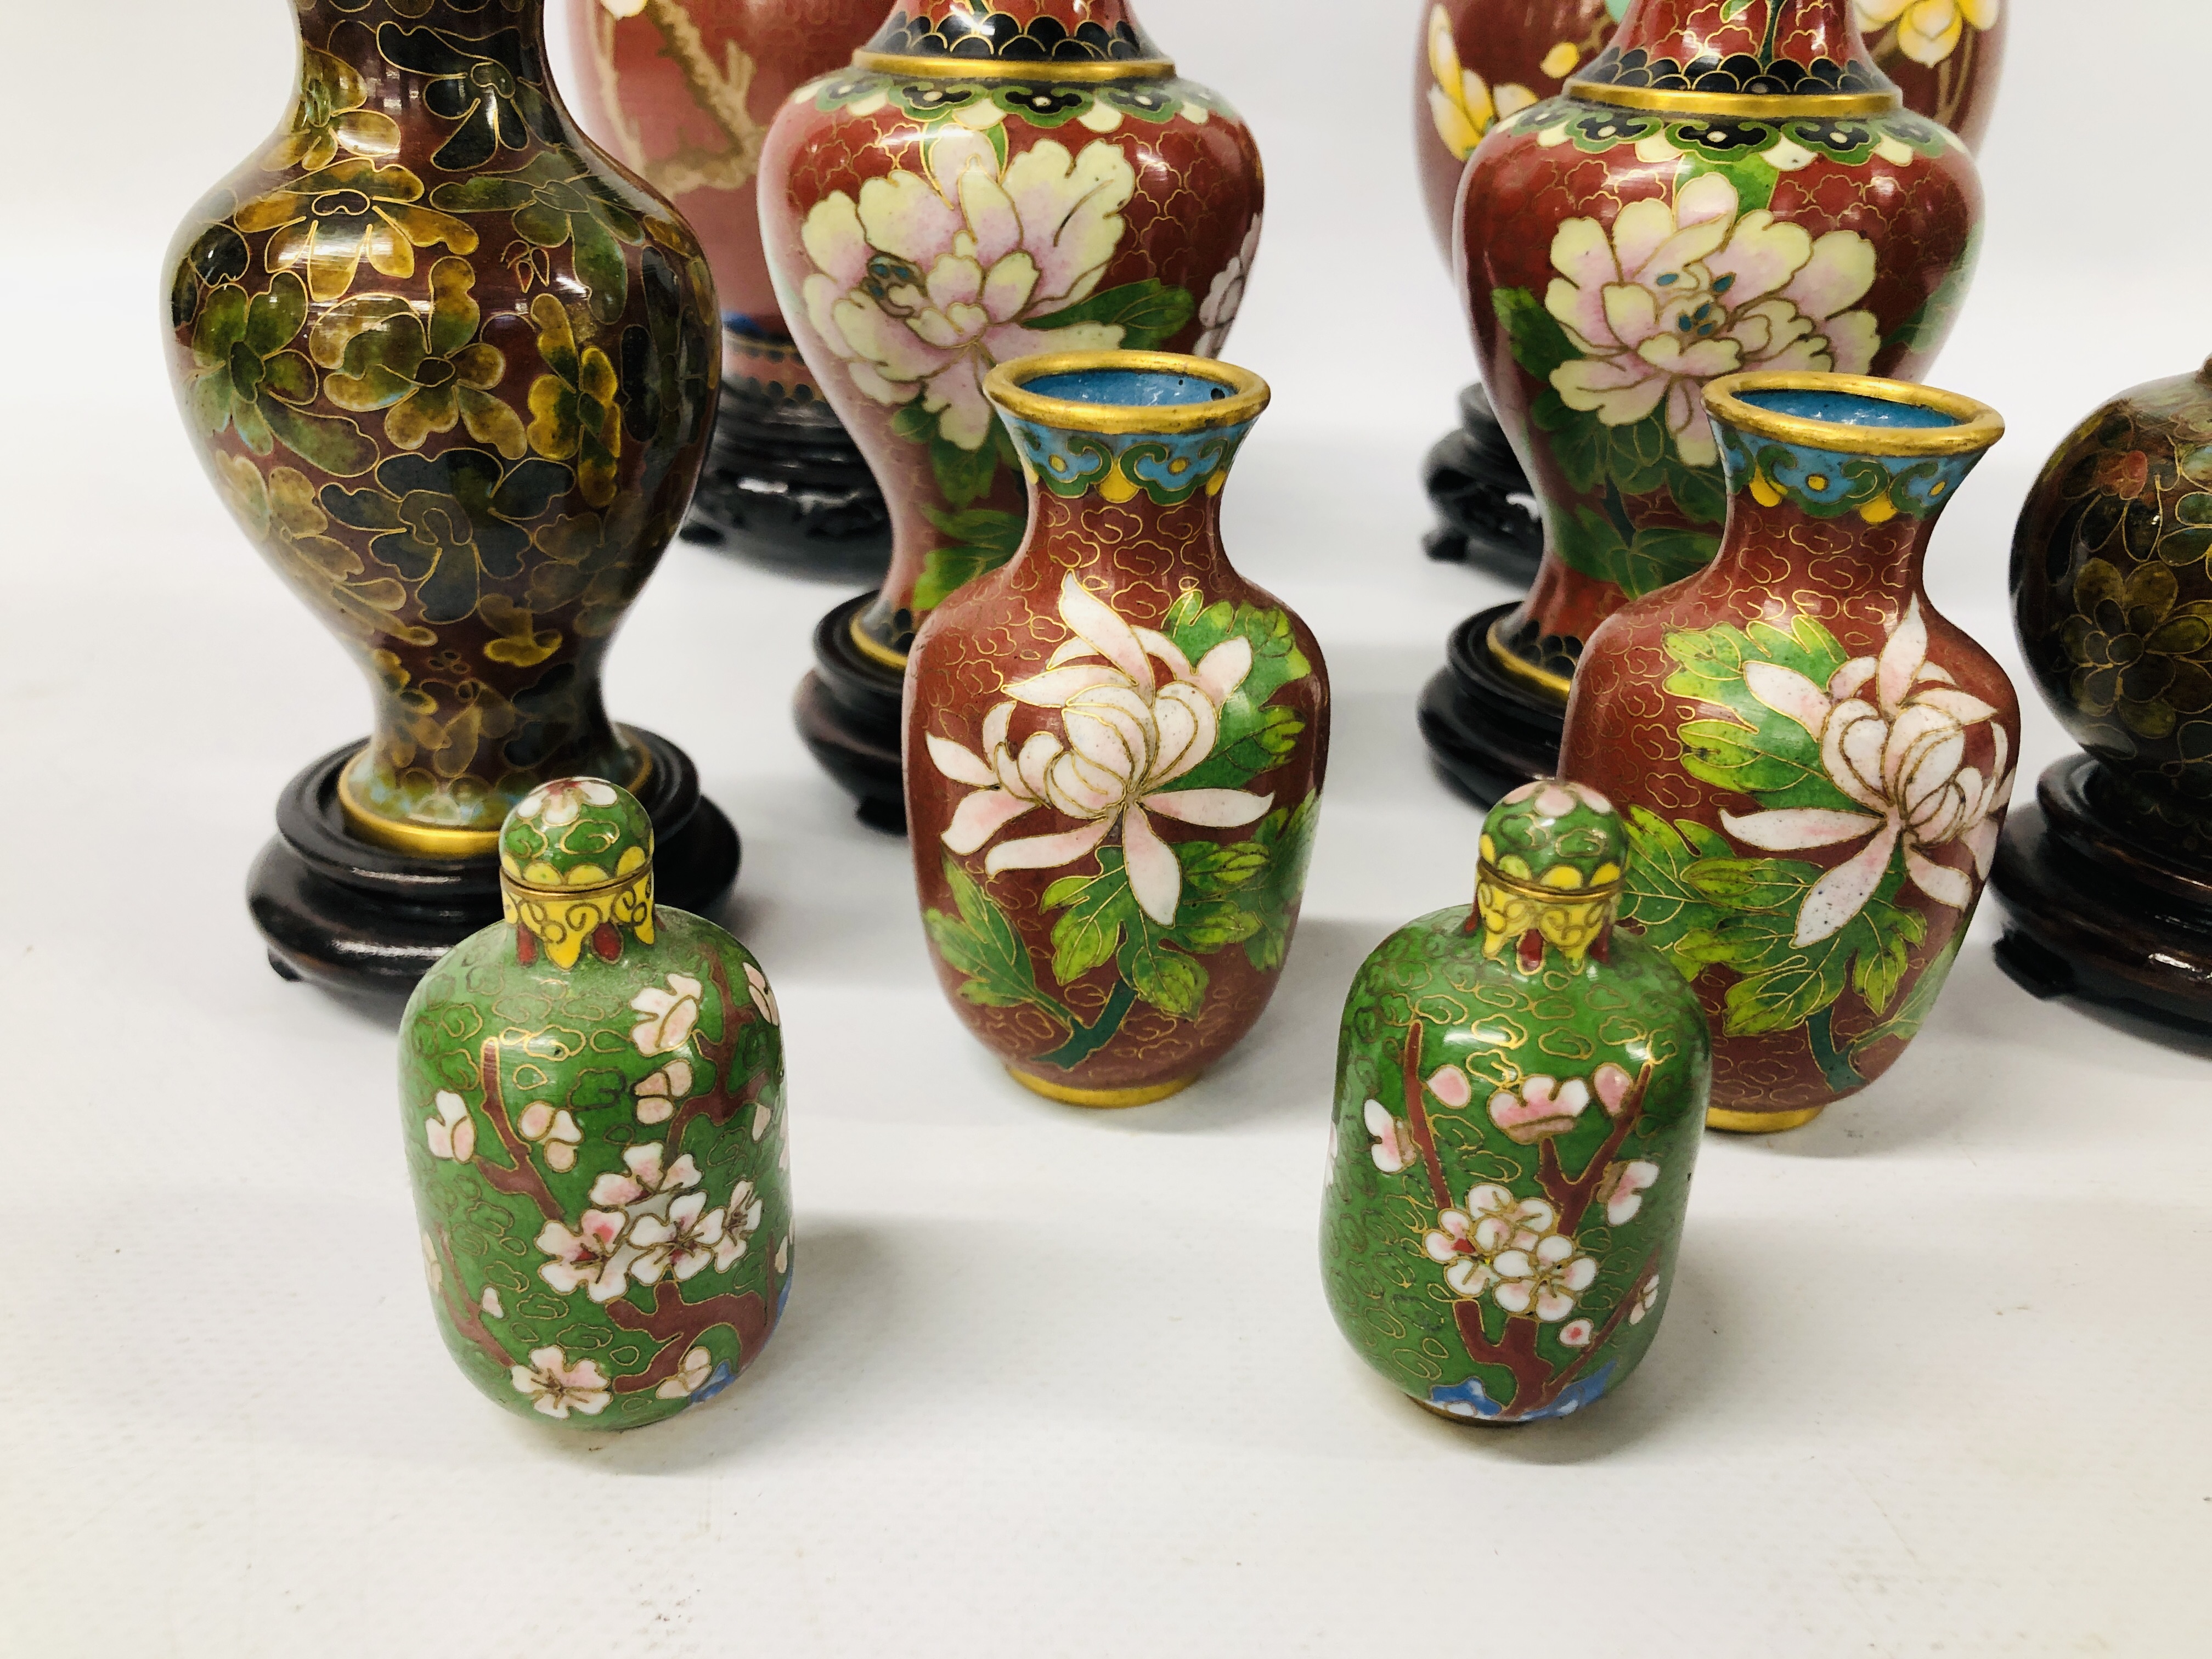 COLLECTION OF CLOISONNE VASES SOME HAVING CARVED HARDWOOD STANDS 10 IN TOTAL ALONG WITH A CLOISONNE - Image 2 of 7